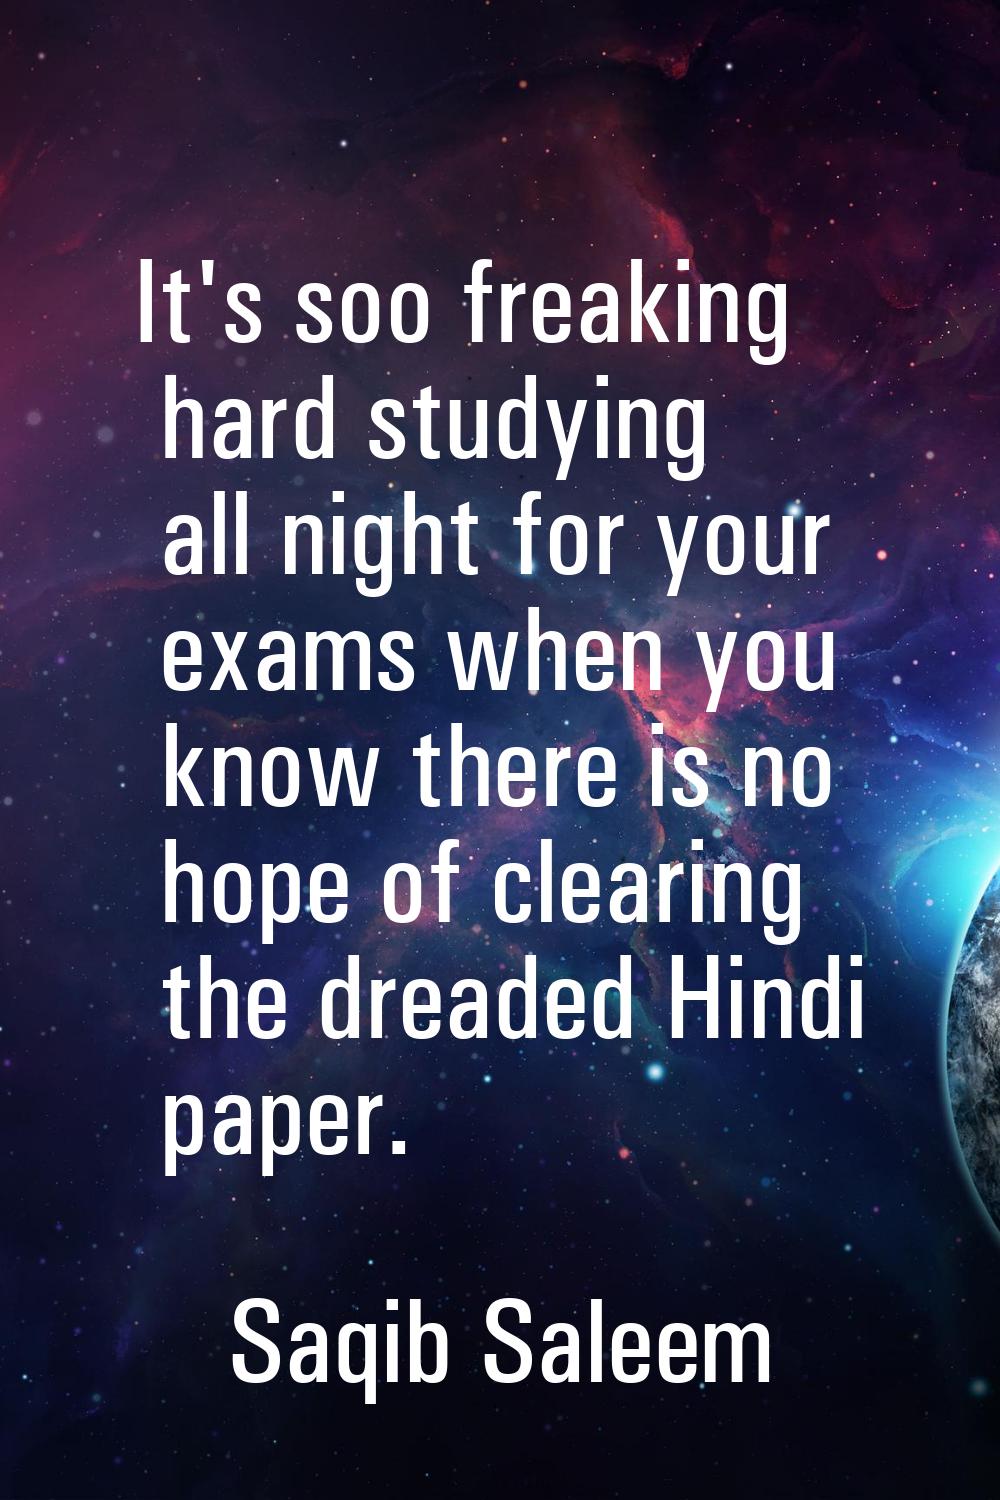 It's soo freaking hard studying all night for your exams when you know there is no hope of clearing